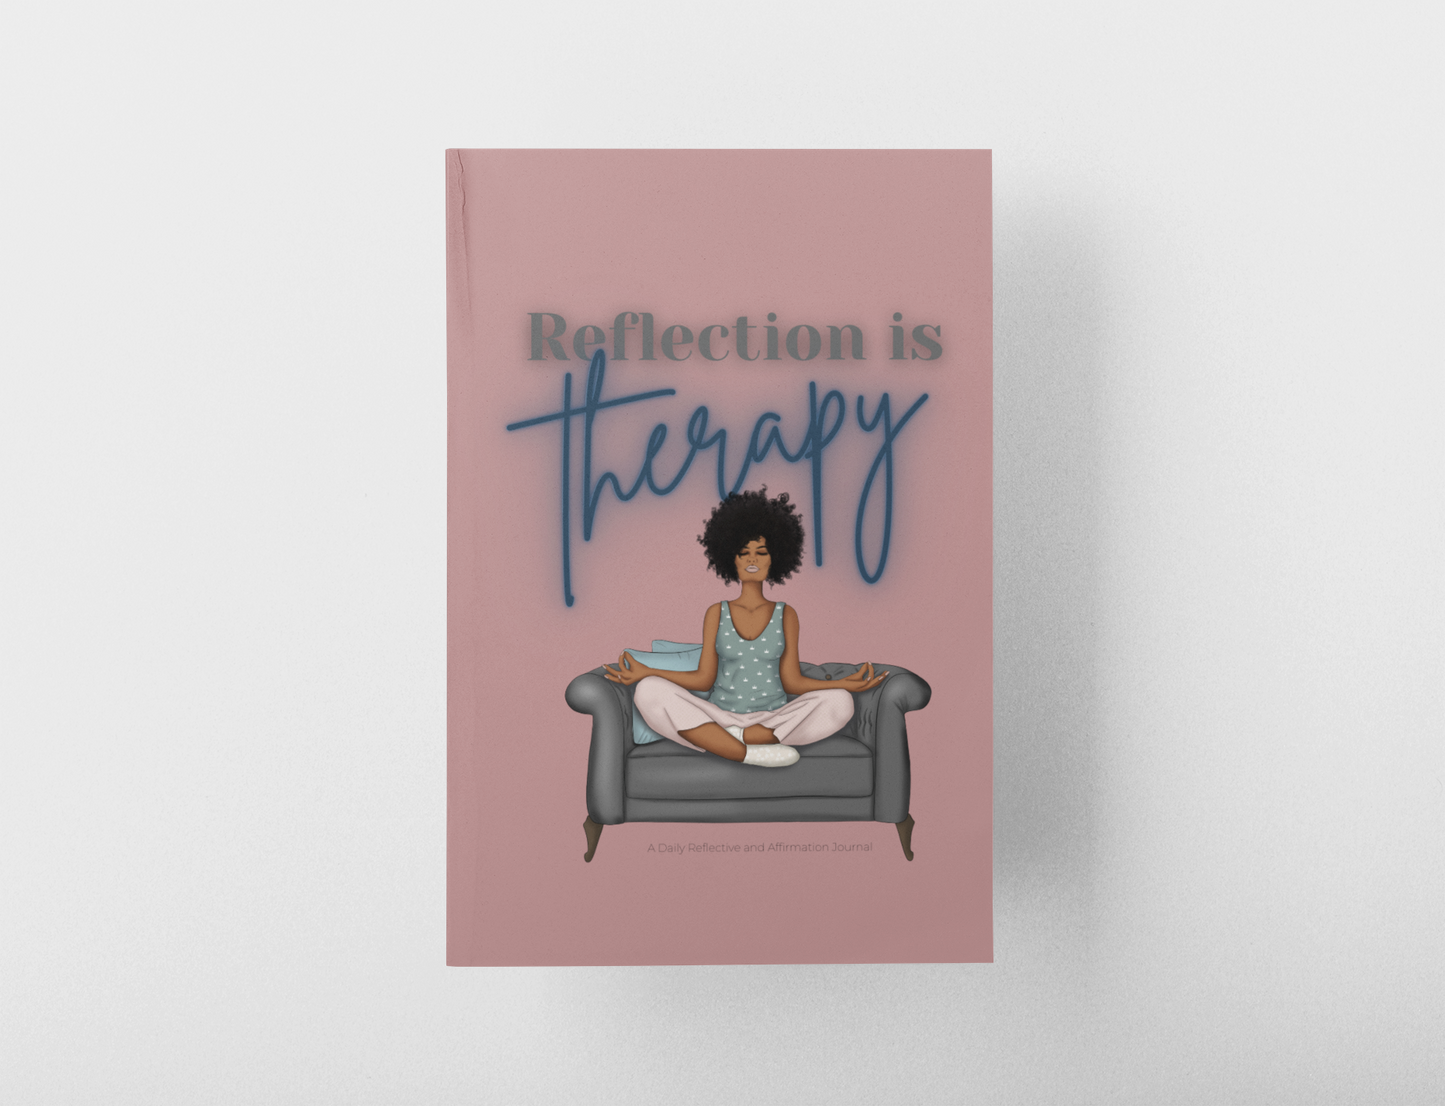 Reflection is Therapy I: A 90-Day Daily Reflective and Affirmation Journal